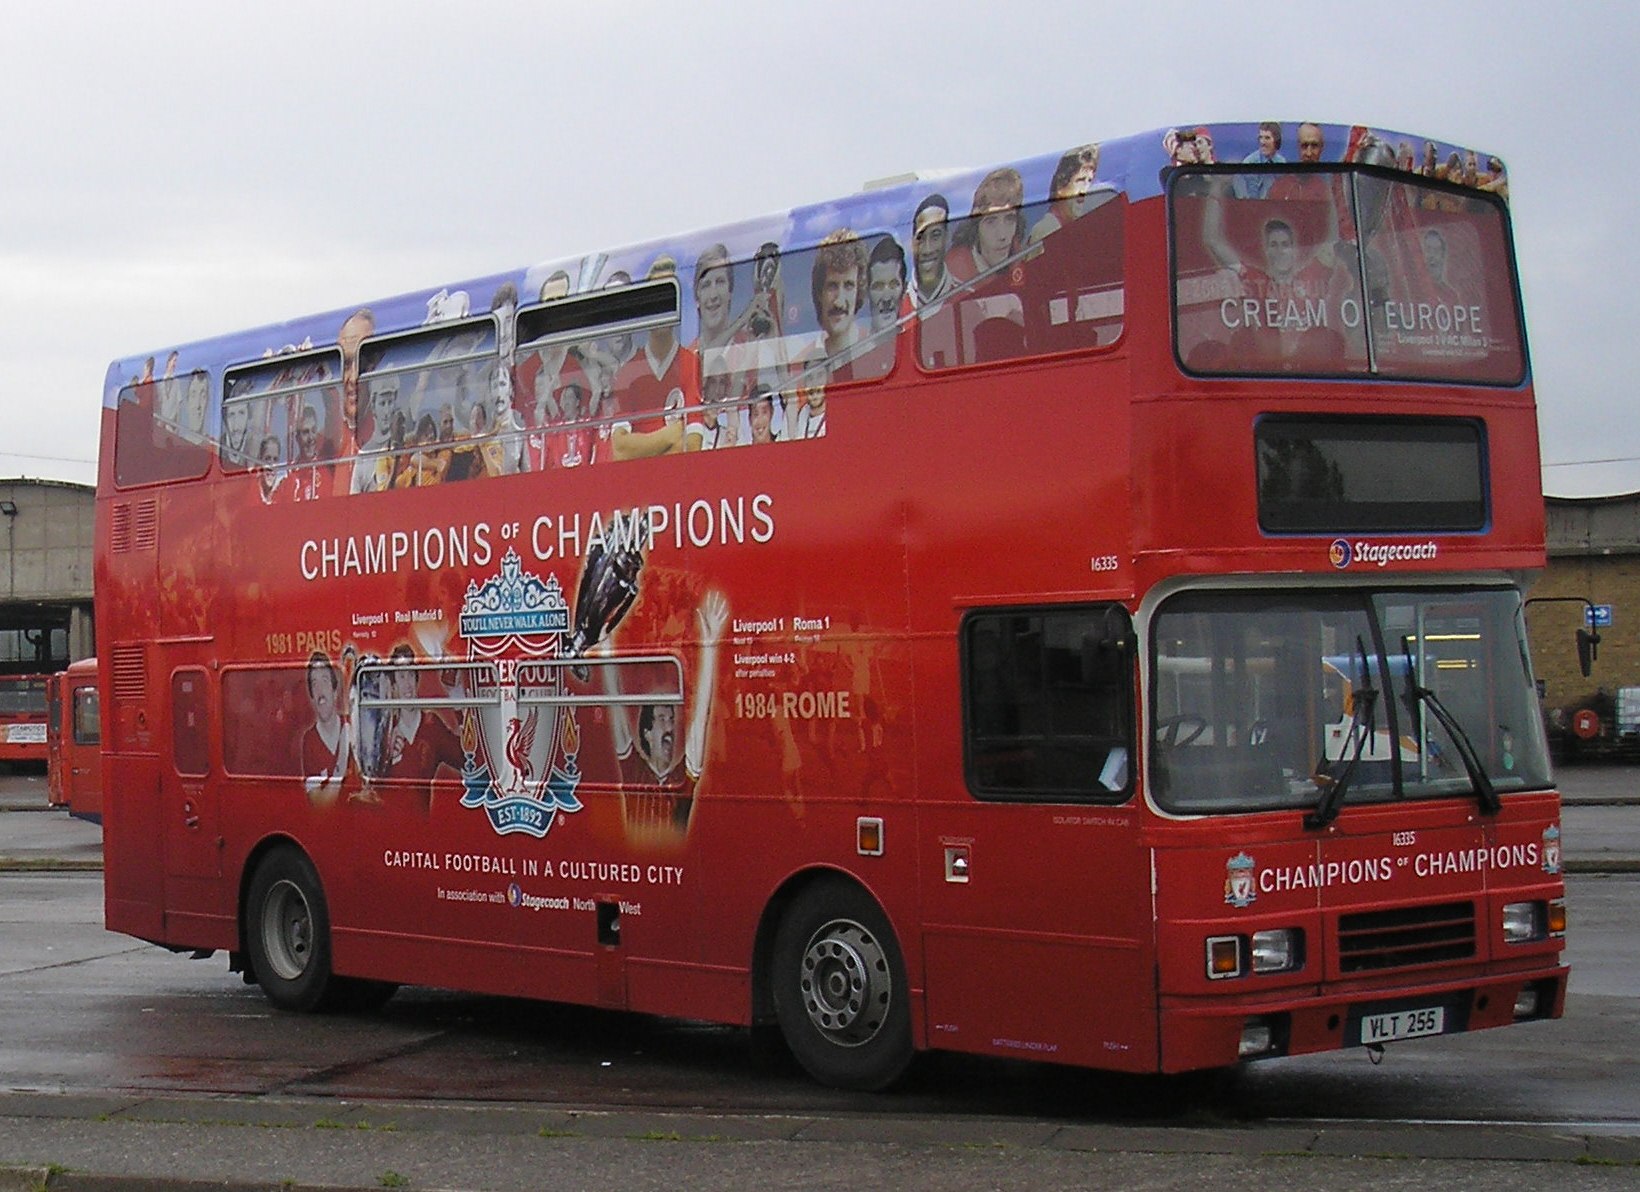 Stagecoach_North_West_bus_16335_(VLT_255)_1996_Volvo_Olympian_Alexander_RL,_Liverpool_FC_livery,_Gillmoss_depot,_11_July_2007